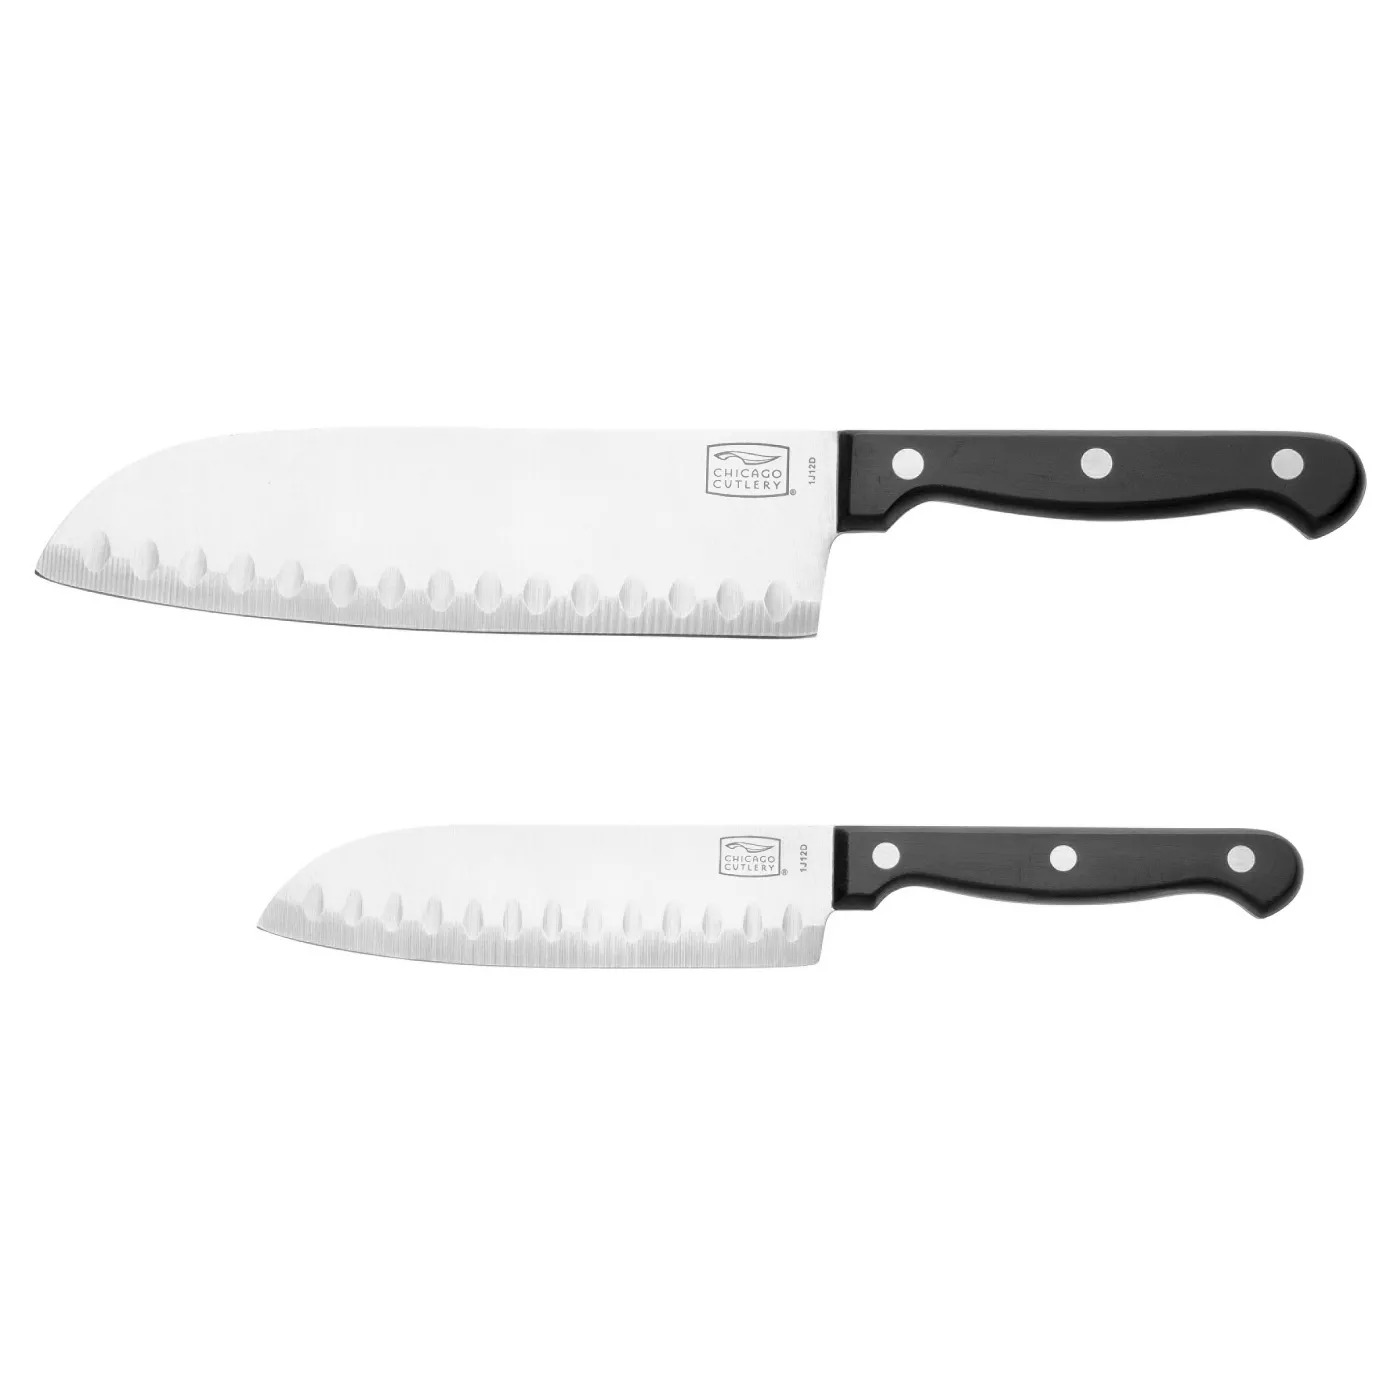 Chicago Cutlery 2-Piece Essentials Santoku/Partoku Knife Set $5.89 at Target + Free Curbside Pickup